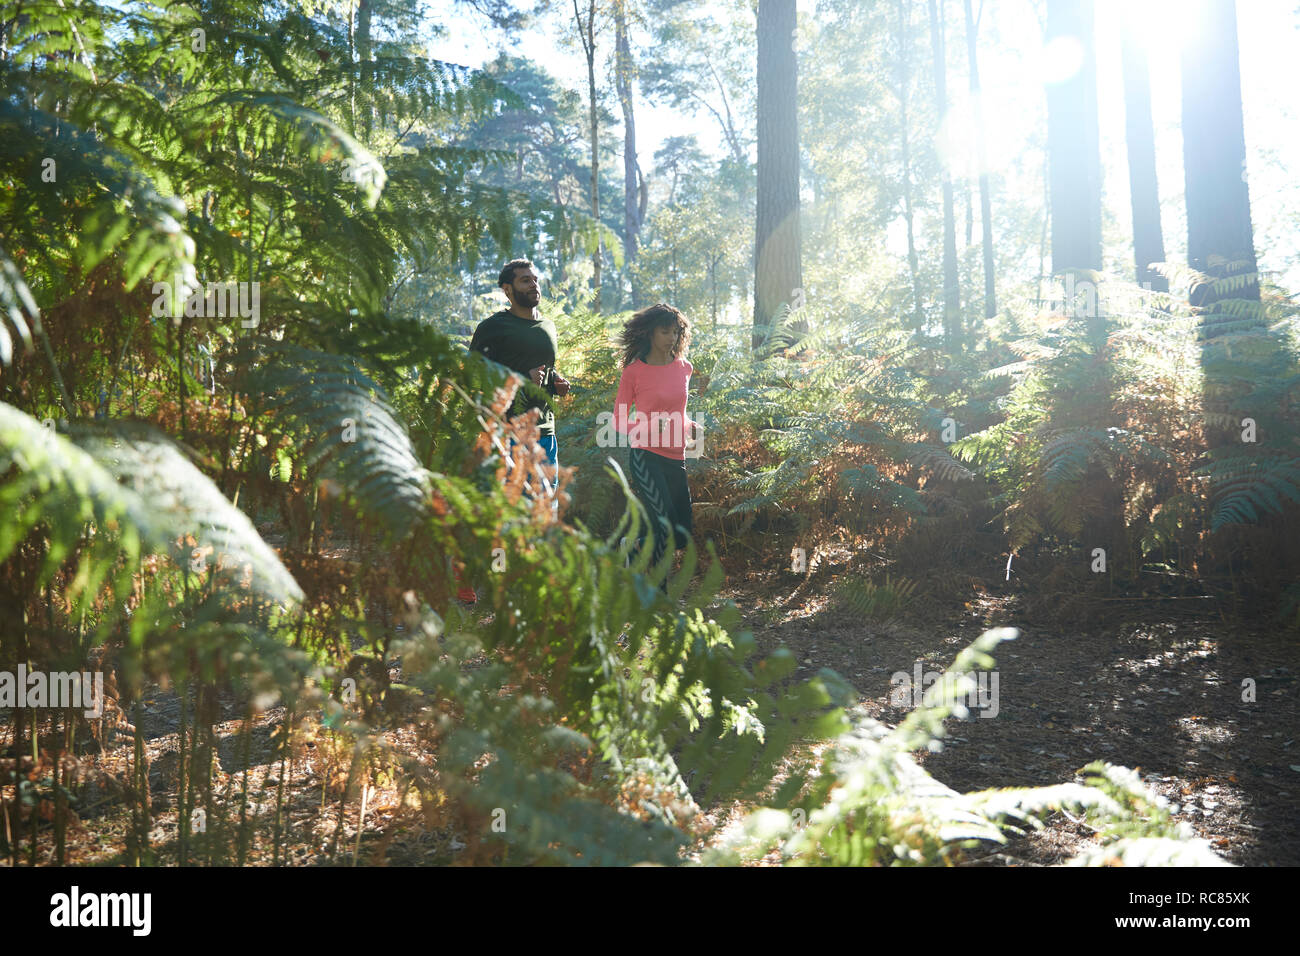 Female and male runners running together through sunlit forest ferns Stock Photo